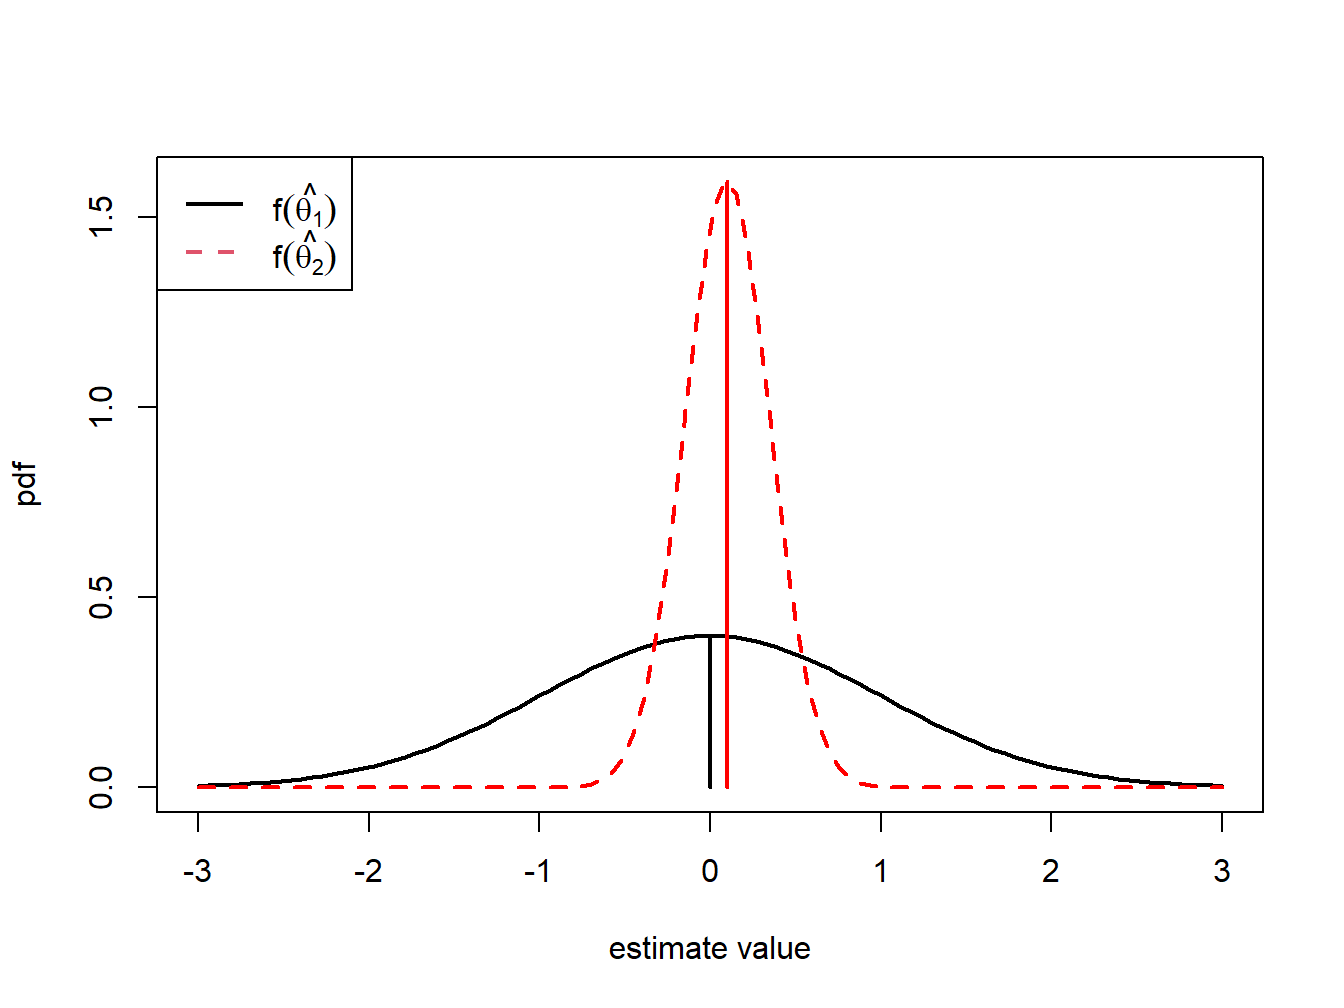 Distributions of competing estimators for $\theta=0$. $\hat{\theta}_{1}$ is unbiased but has high variance, and $\hat{\theta}_{2}$ is biased but has low variance.